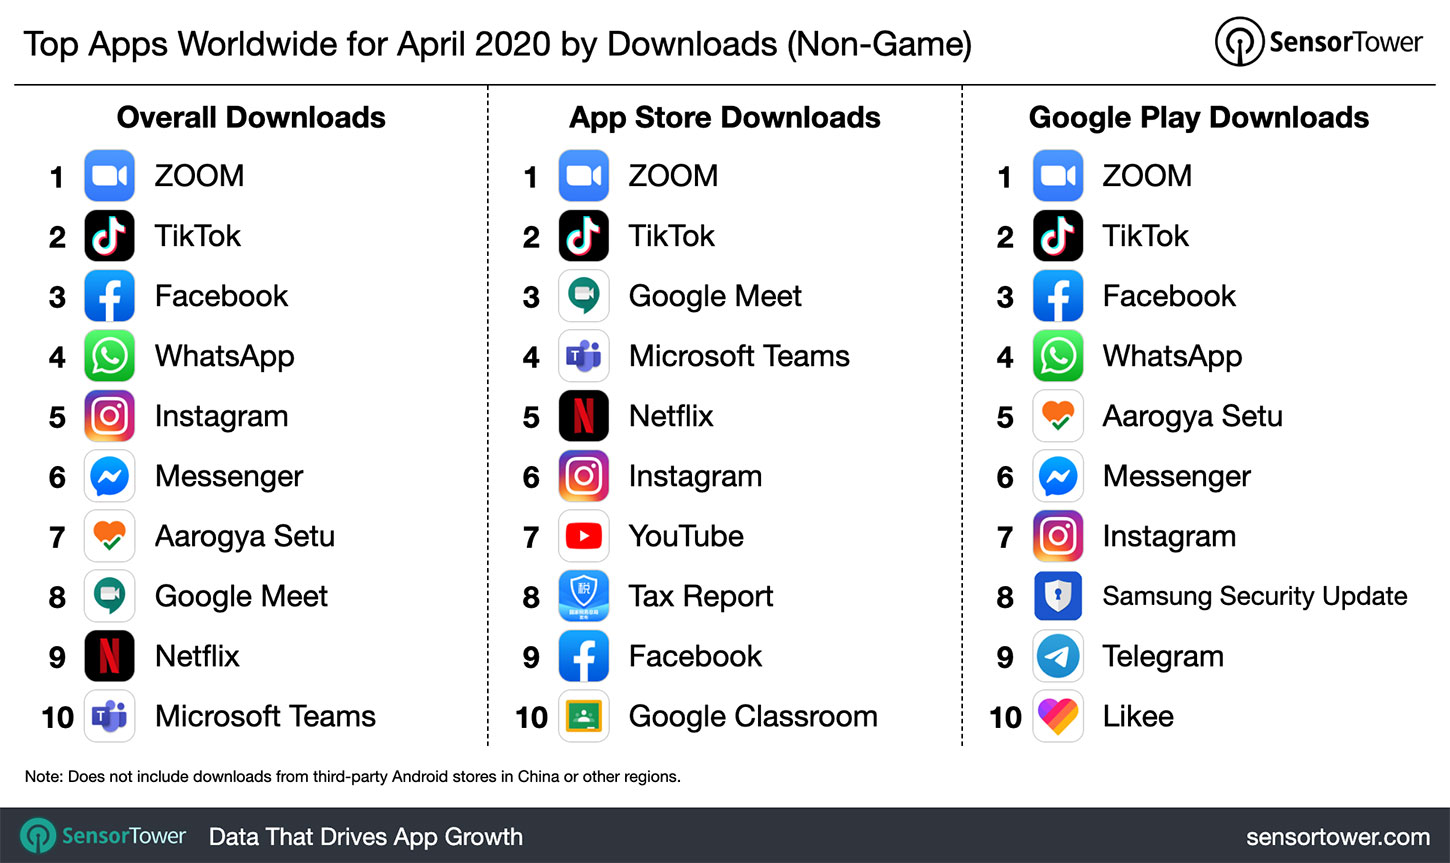 The Top 10 Most Downloaded Apps Worldwide In The Past Month Includes Some Unusual Entries Digital Information World